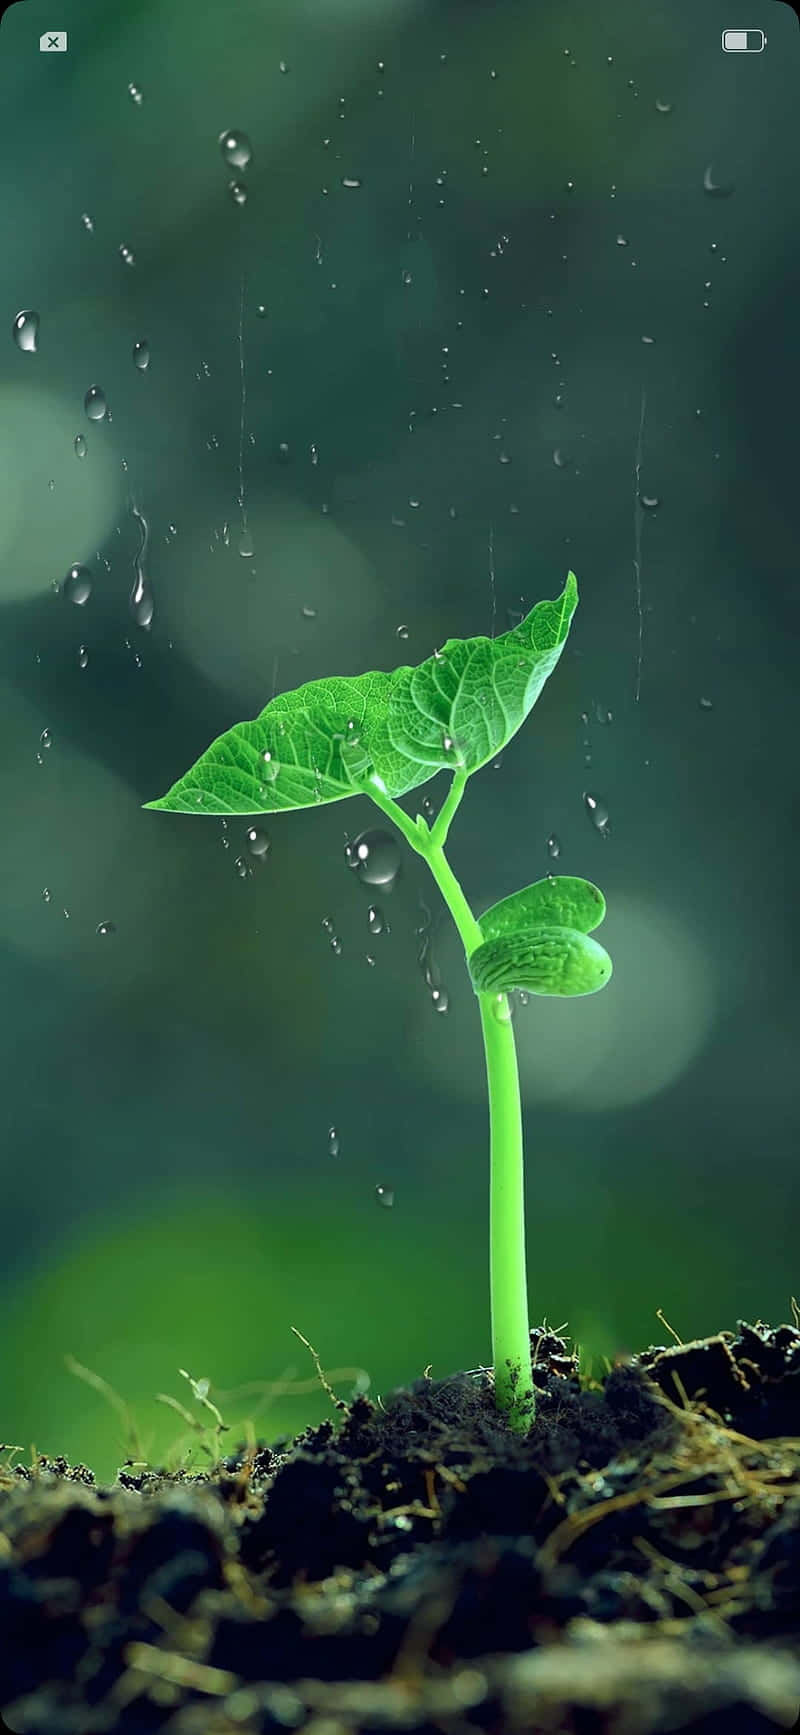 Download Raindrops On Tiny Sprout Plant Phone Wallpaper | Wallpapers.com